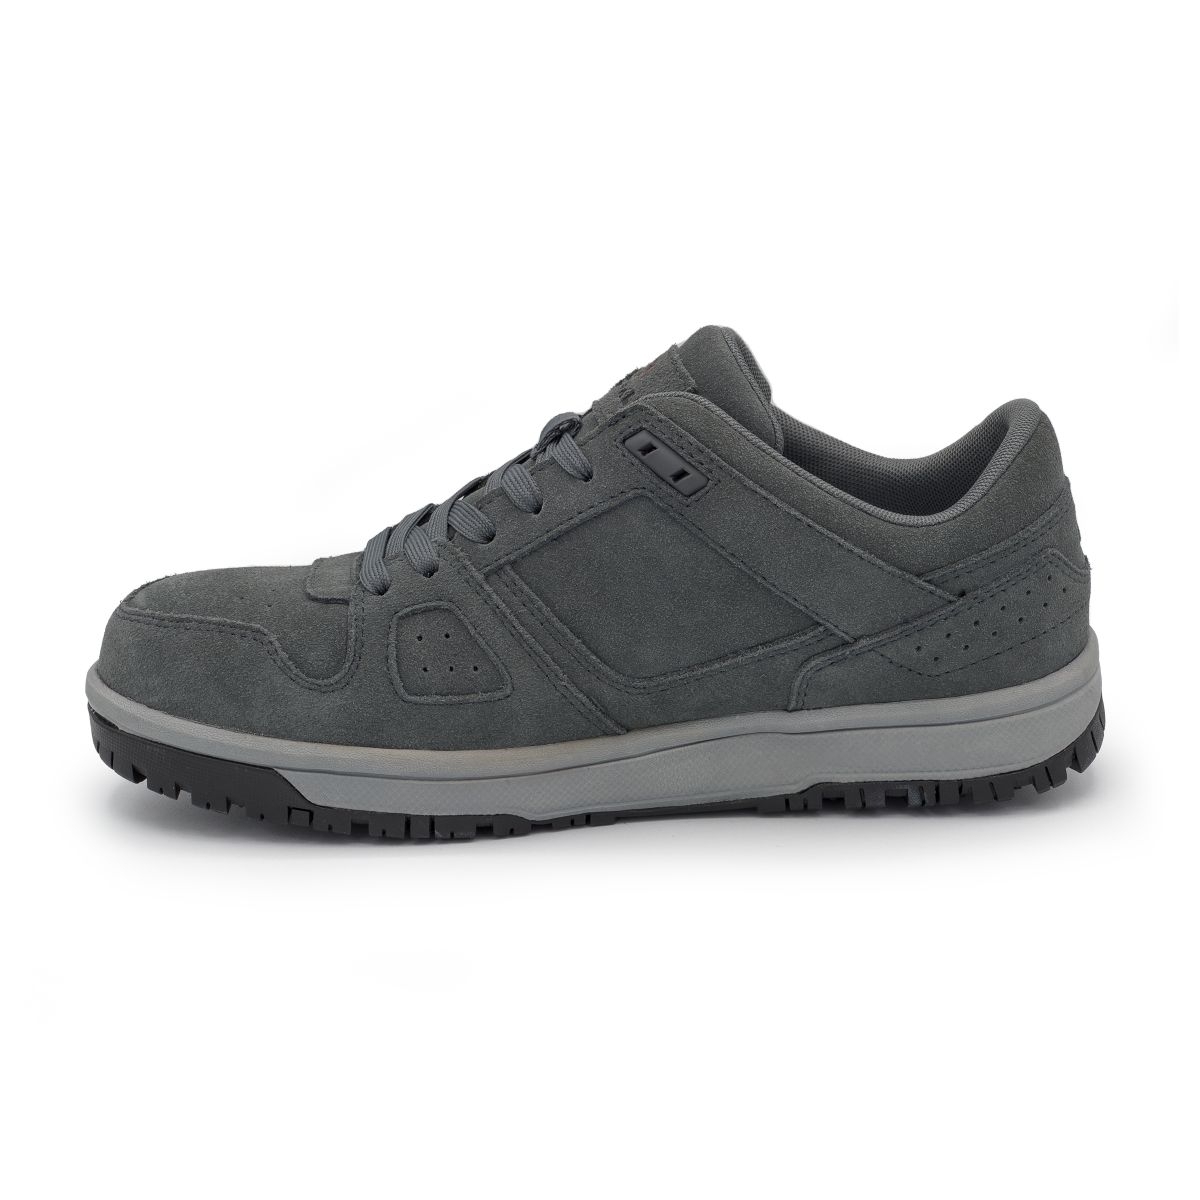 AIRWALK SAFETY Men's Mongo Composite Toe EH Work Shoe Charcoal/Grey - AW6301 CHARCOAL/GRAY - CHARCOAL/GRAY, 10.5-M